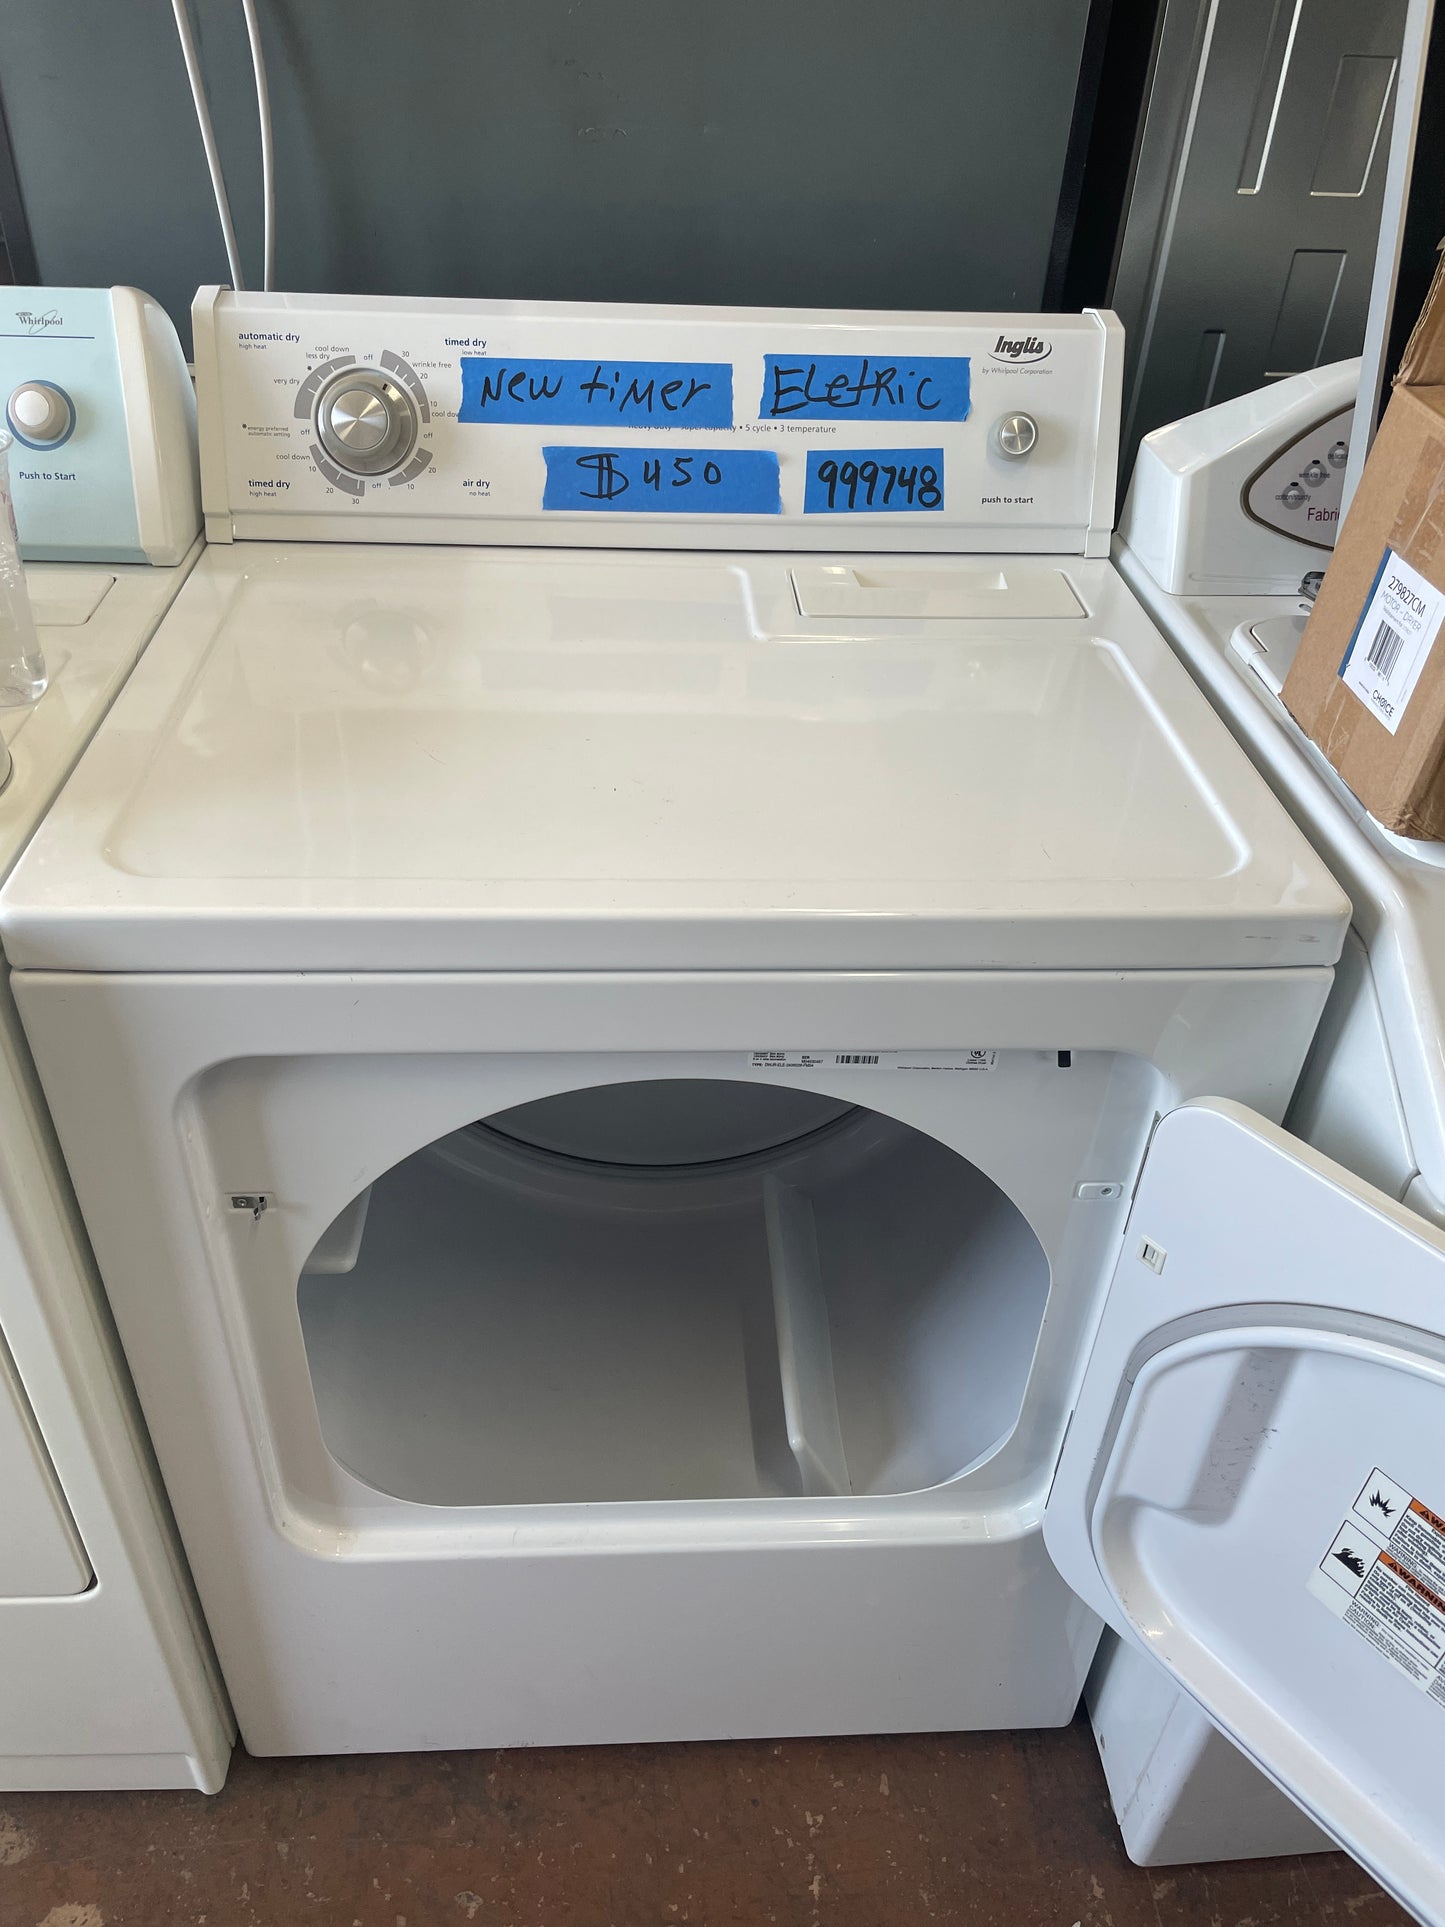 Inglis Whirlpool Electric Dryer In White, IED4400VQ1, 999748